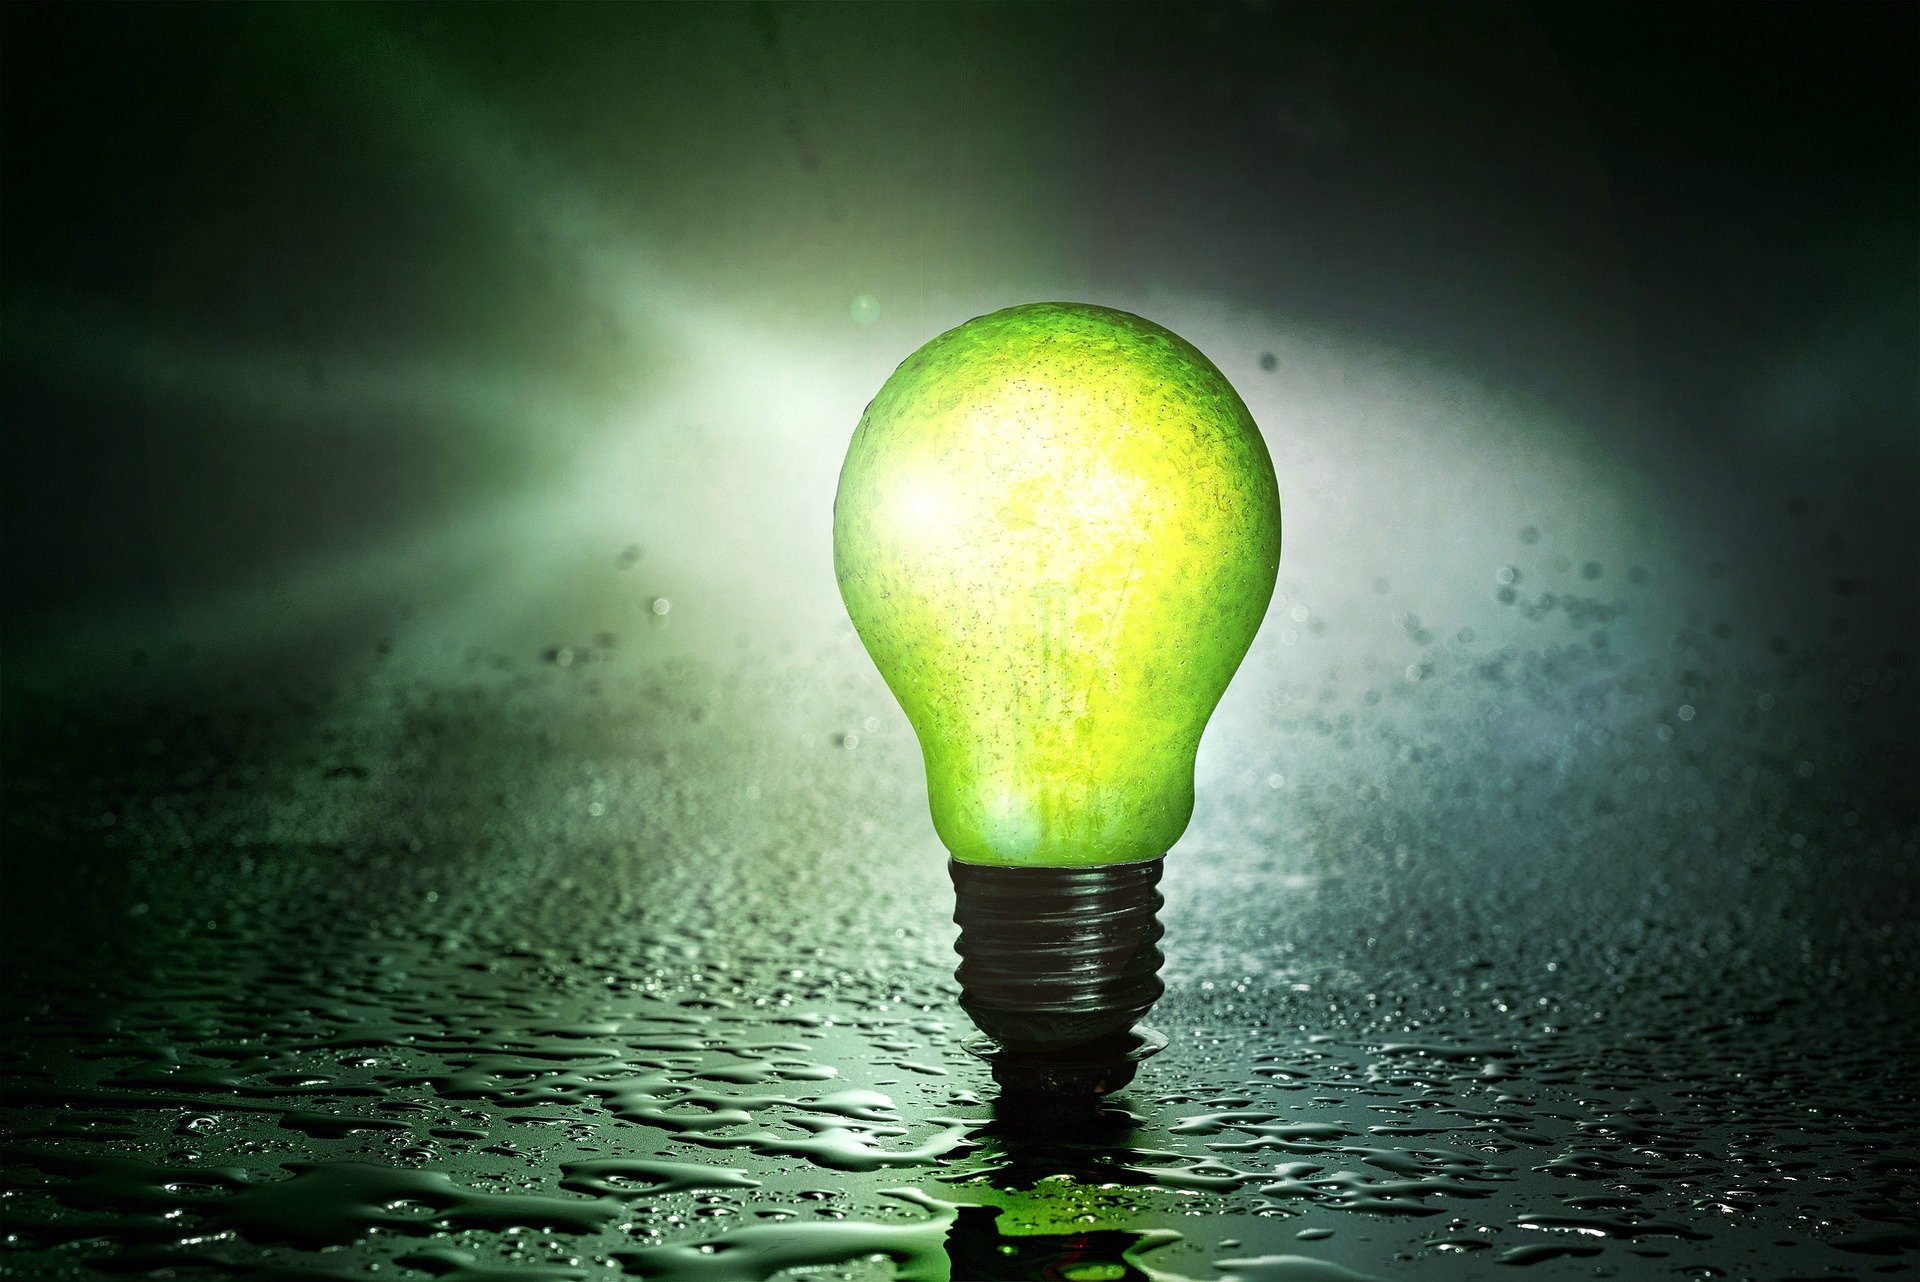 lightbulb - theories of climate change adaptation